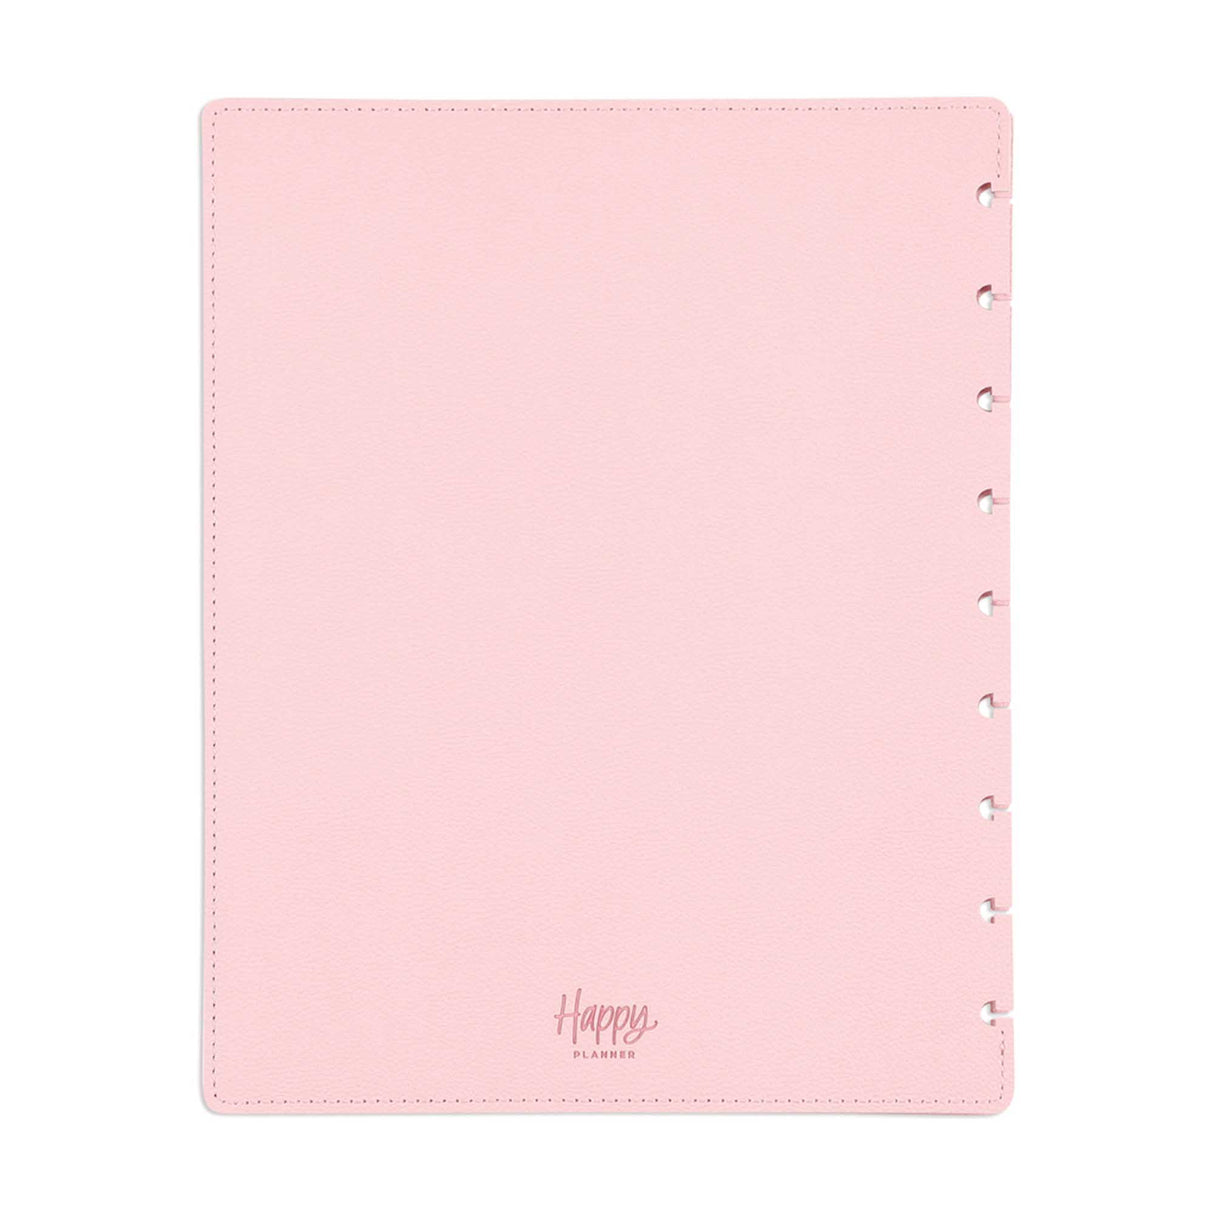 Happy Planner Blush Classic Deluxe Snap-In Cover